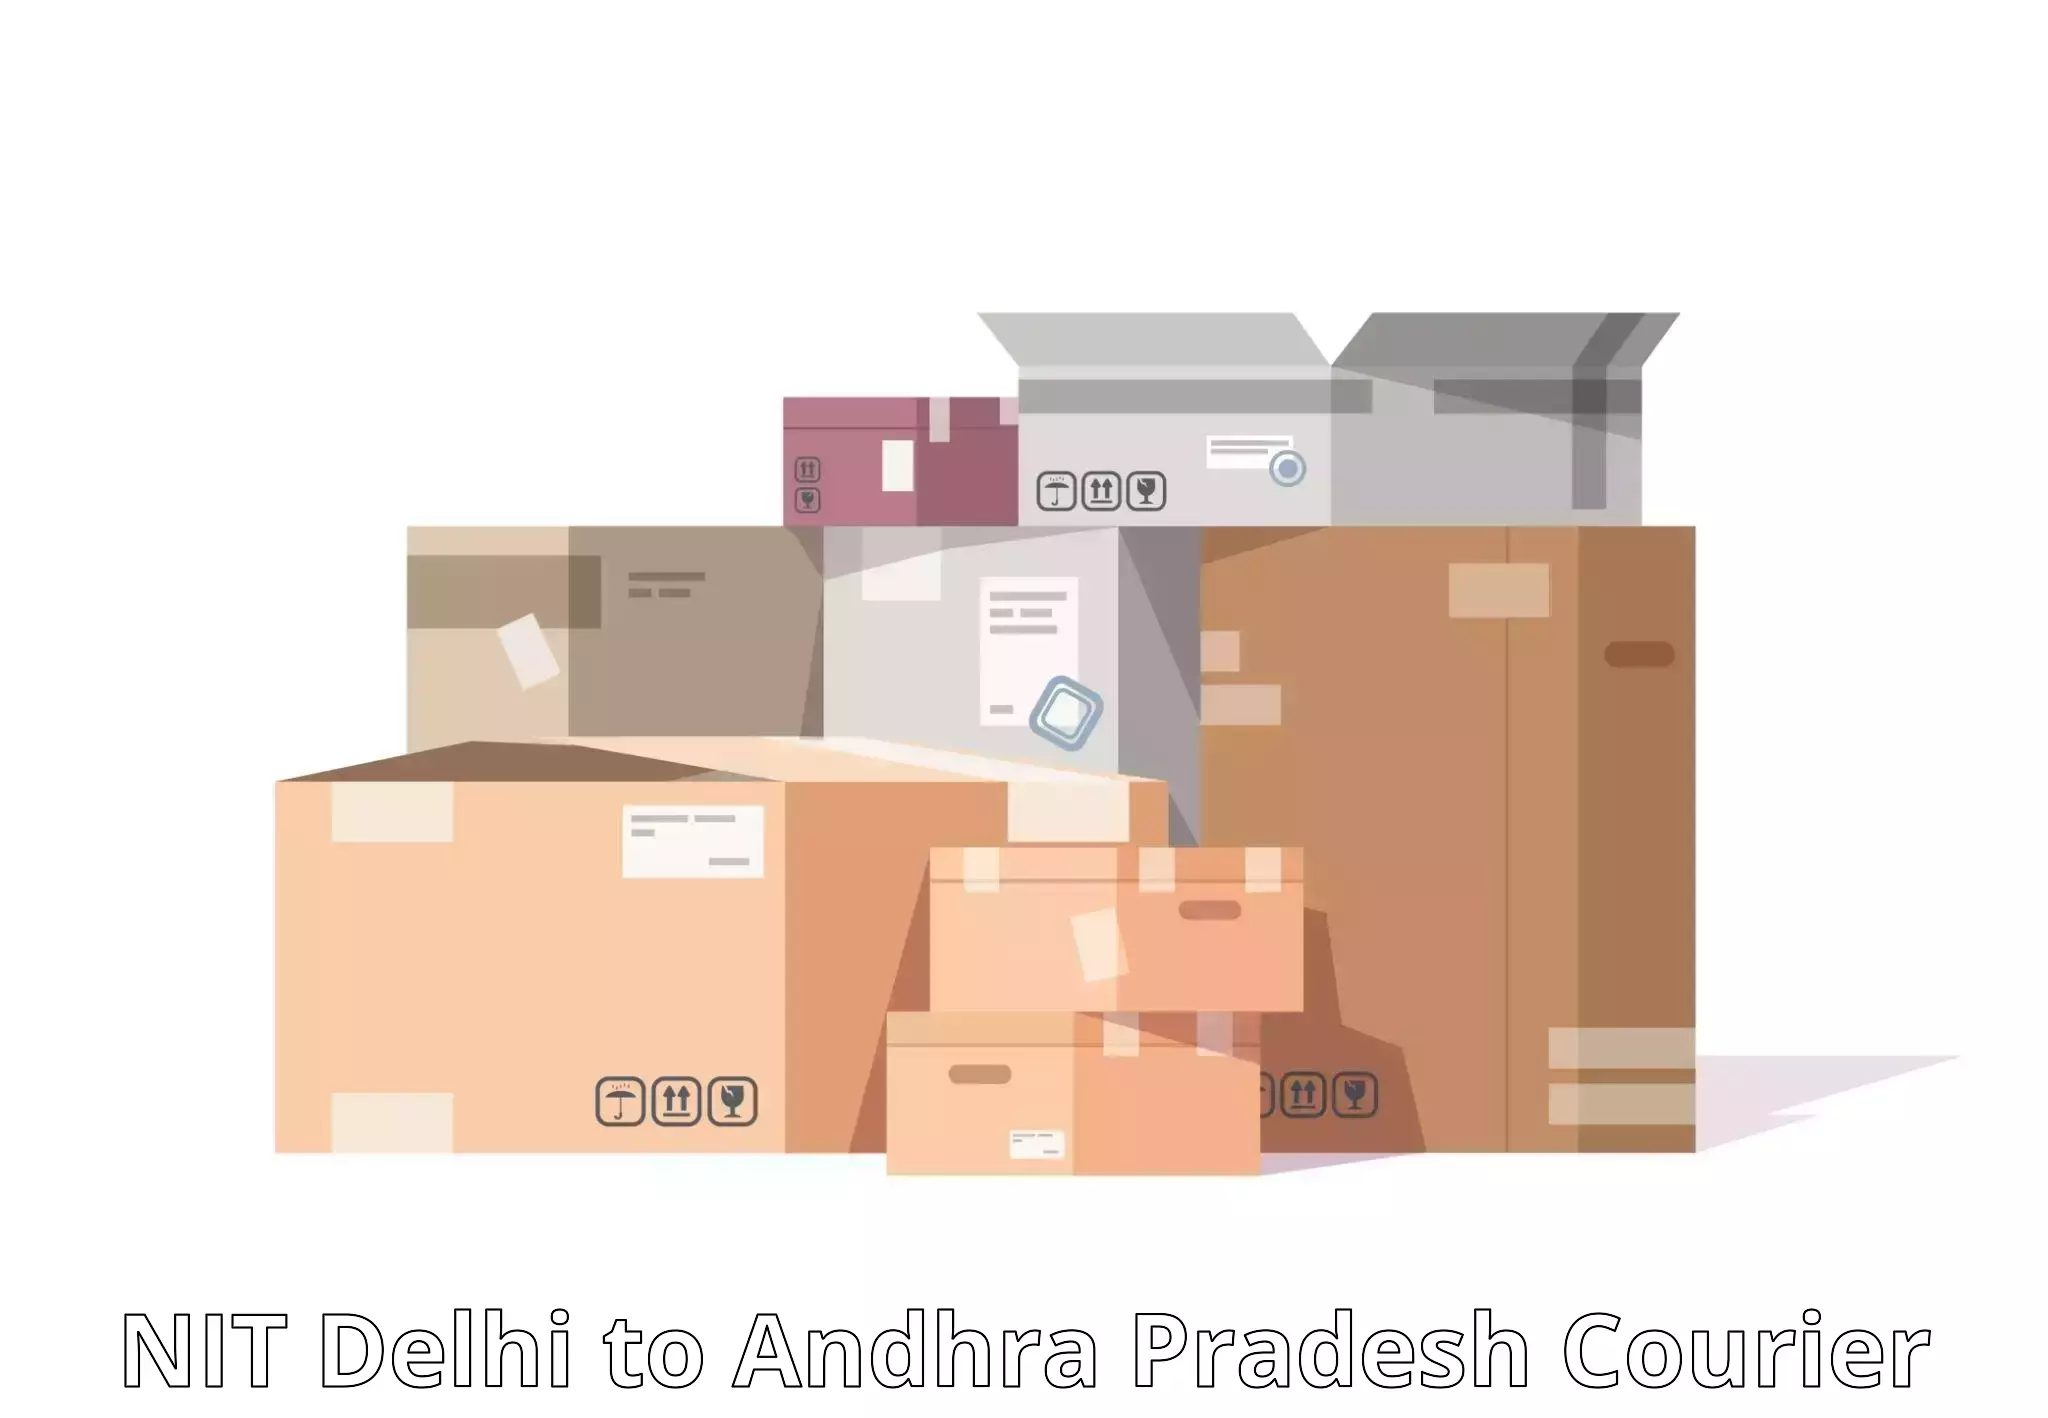 State-of-the-art courier technology in NIT Delhi to Samalkot